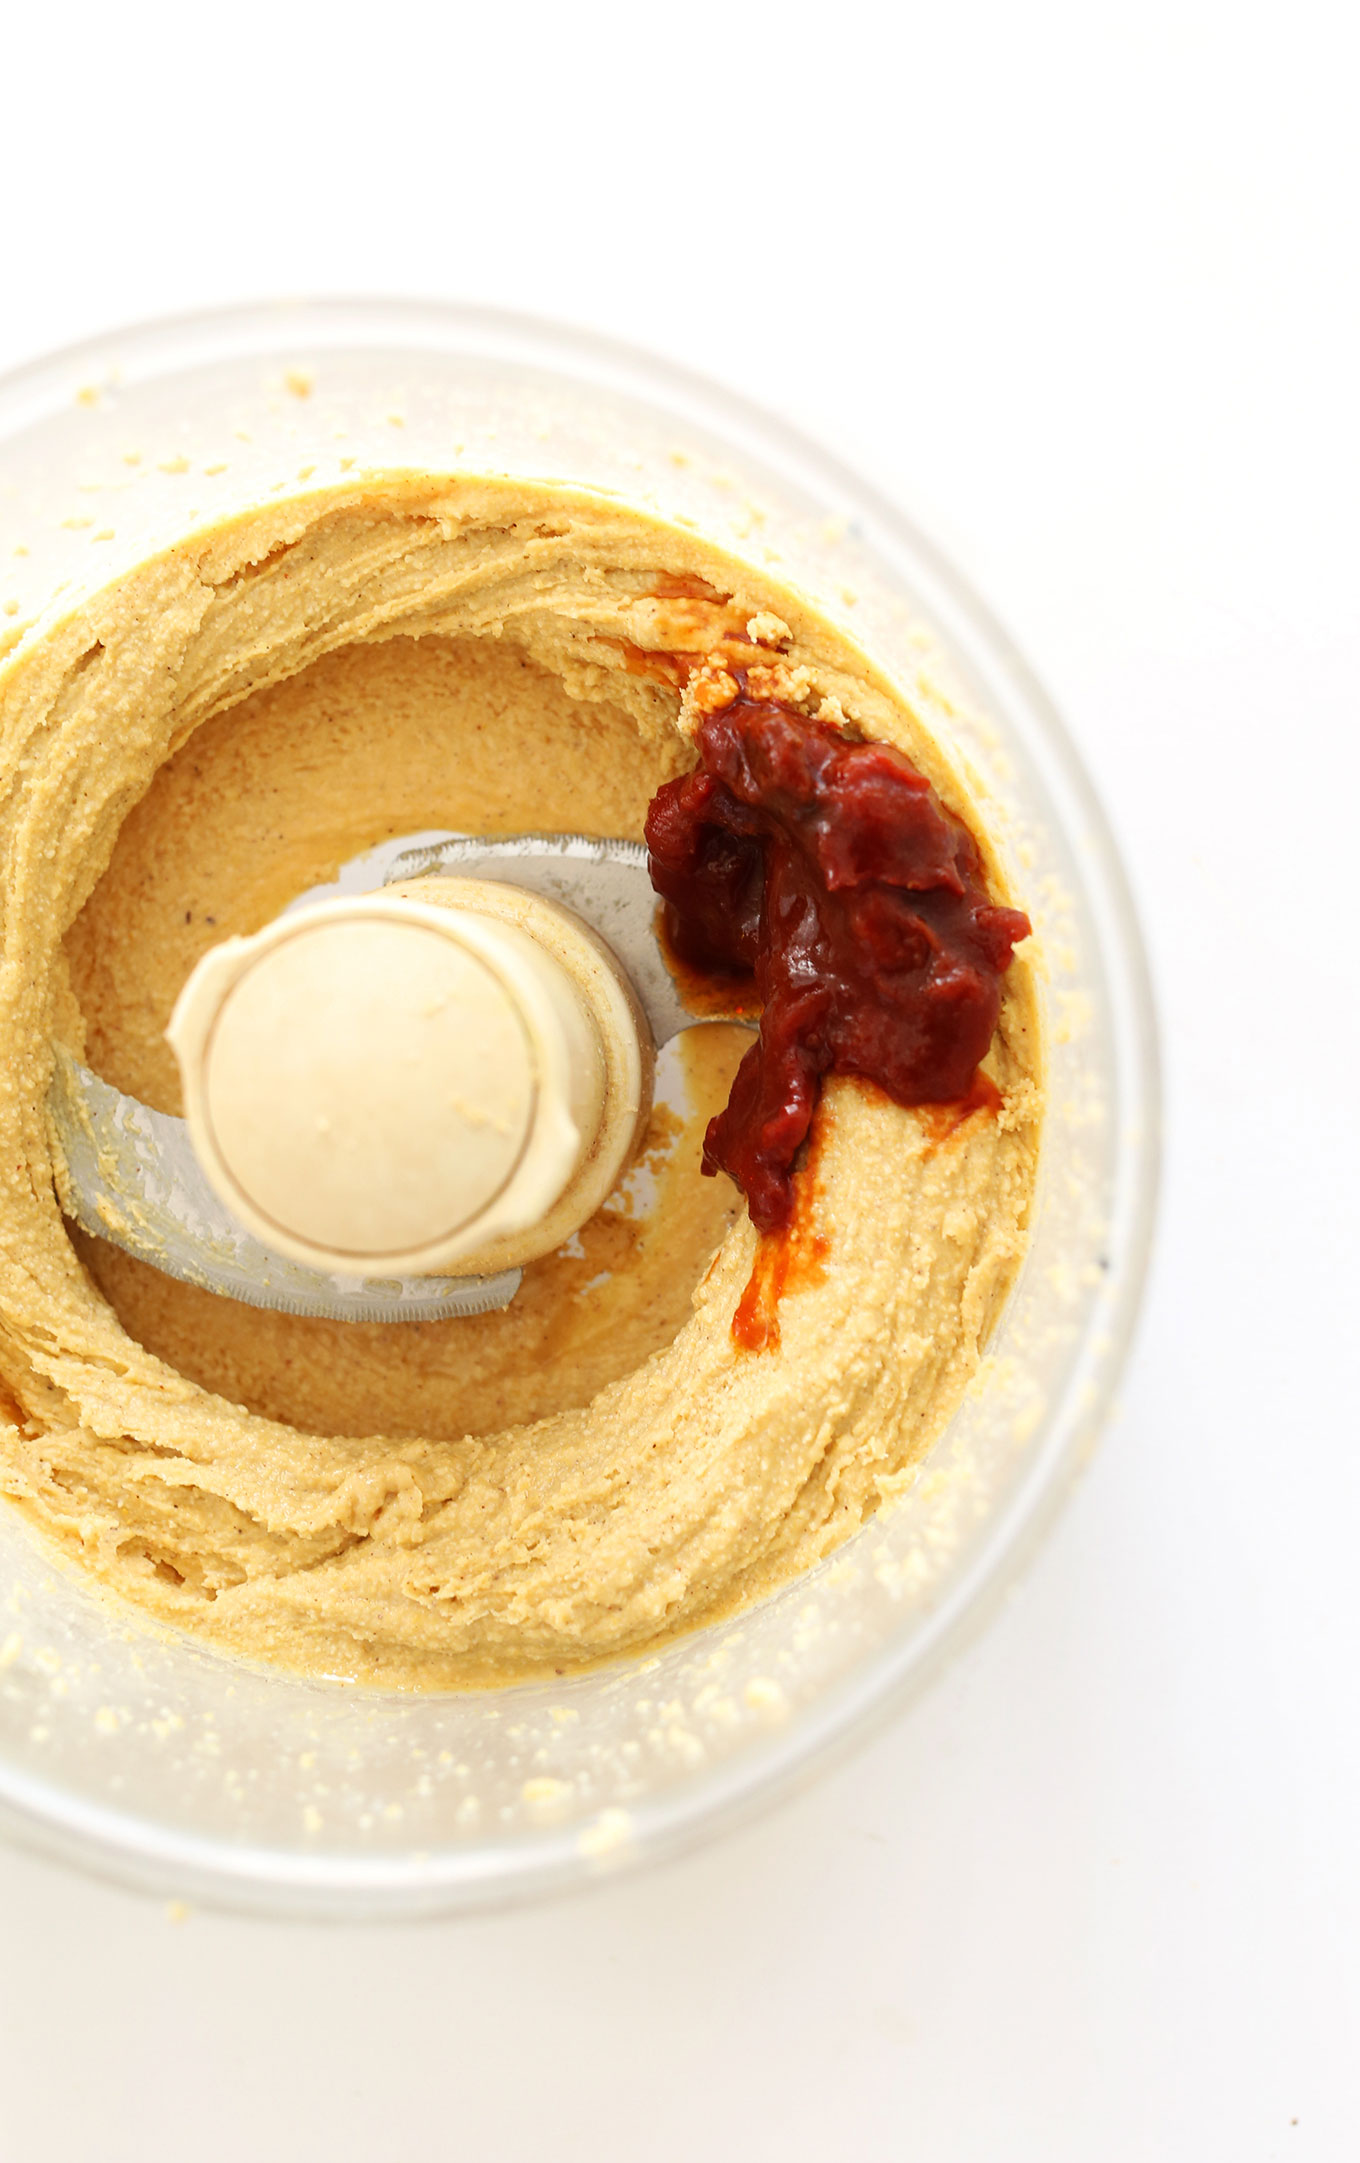 Chipotle pepper added to a food processor with other Mexican Spreadable Cheese ingredients